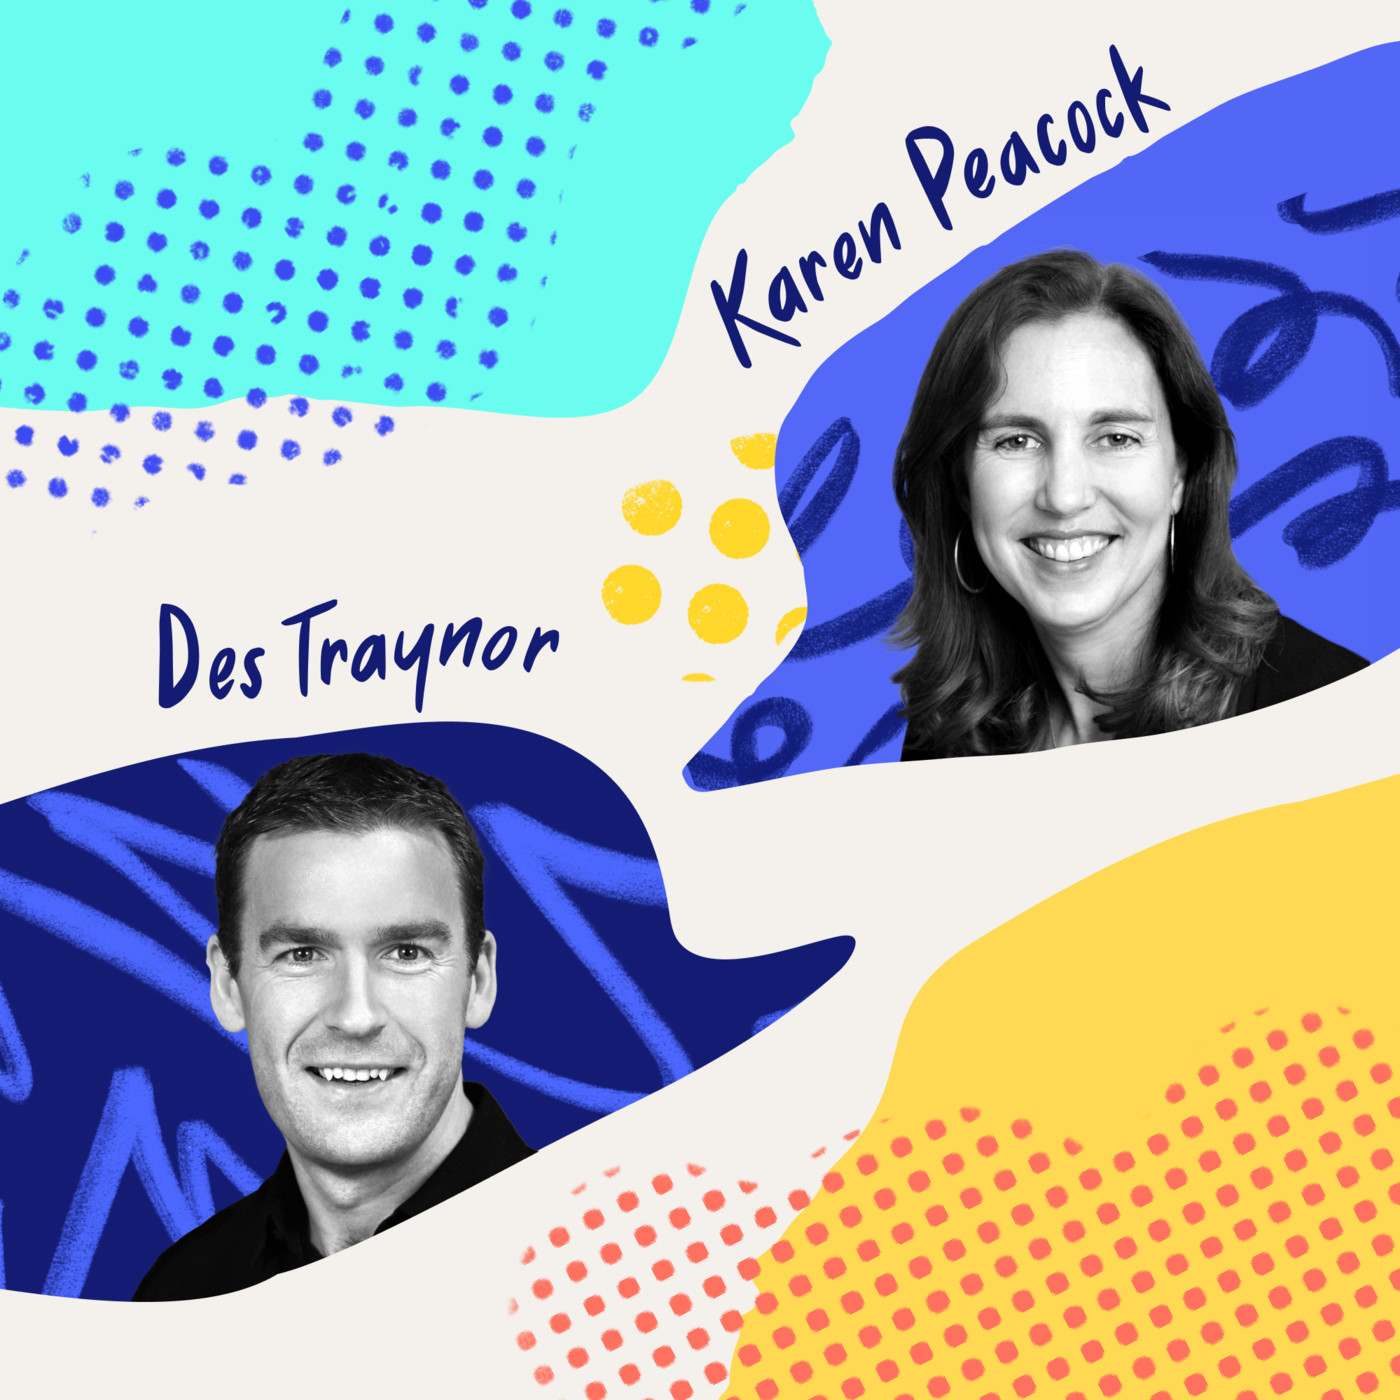 Reflecting on the Intercom journey - Karen Peacock and Des Traynor in conversation